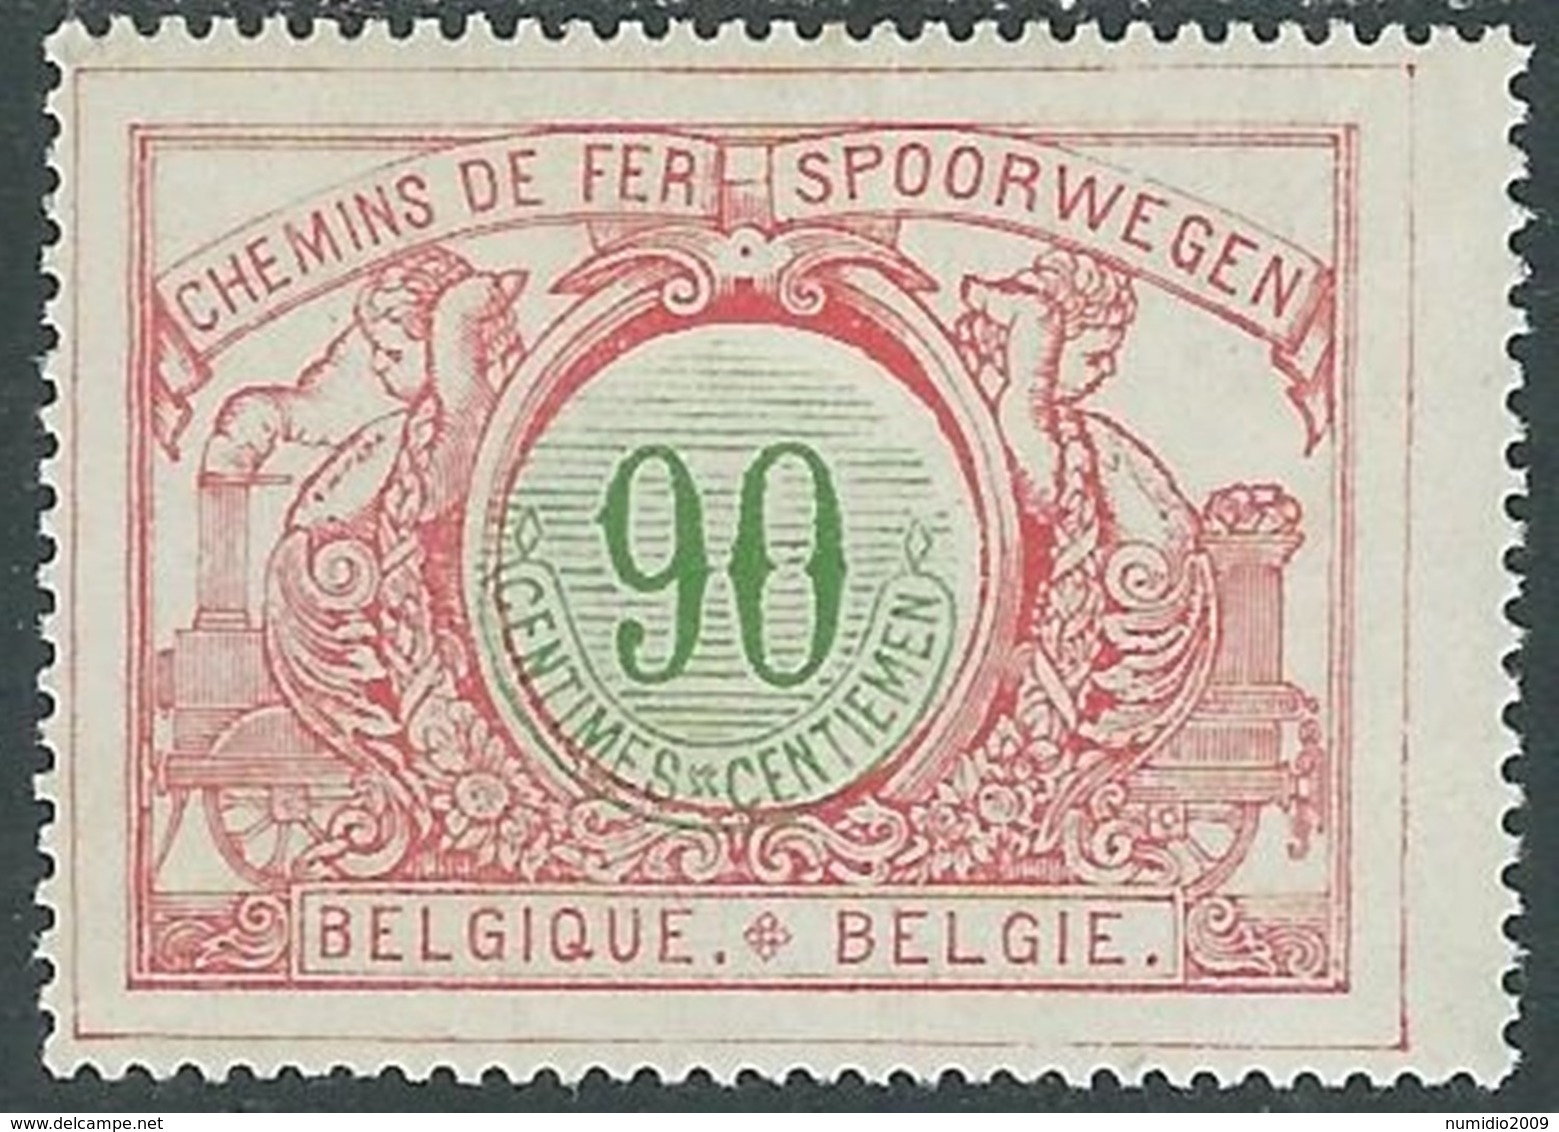 1902-05 BELGIO PACCHI POSTALI 90 CENT MH * - RB13-9 - Bagages [BA]